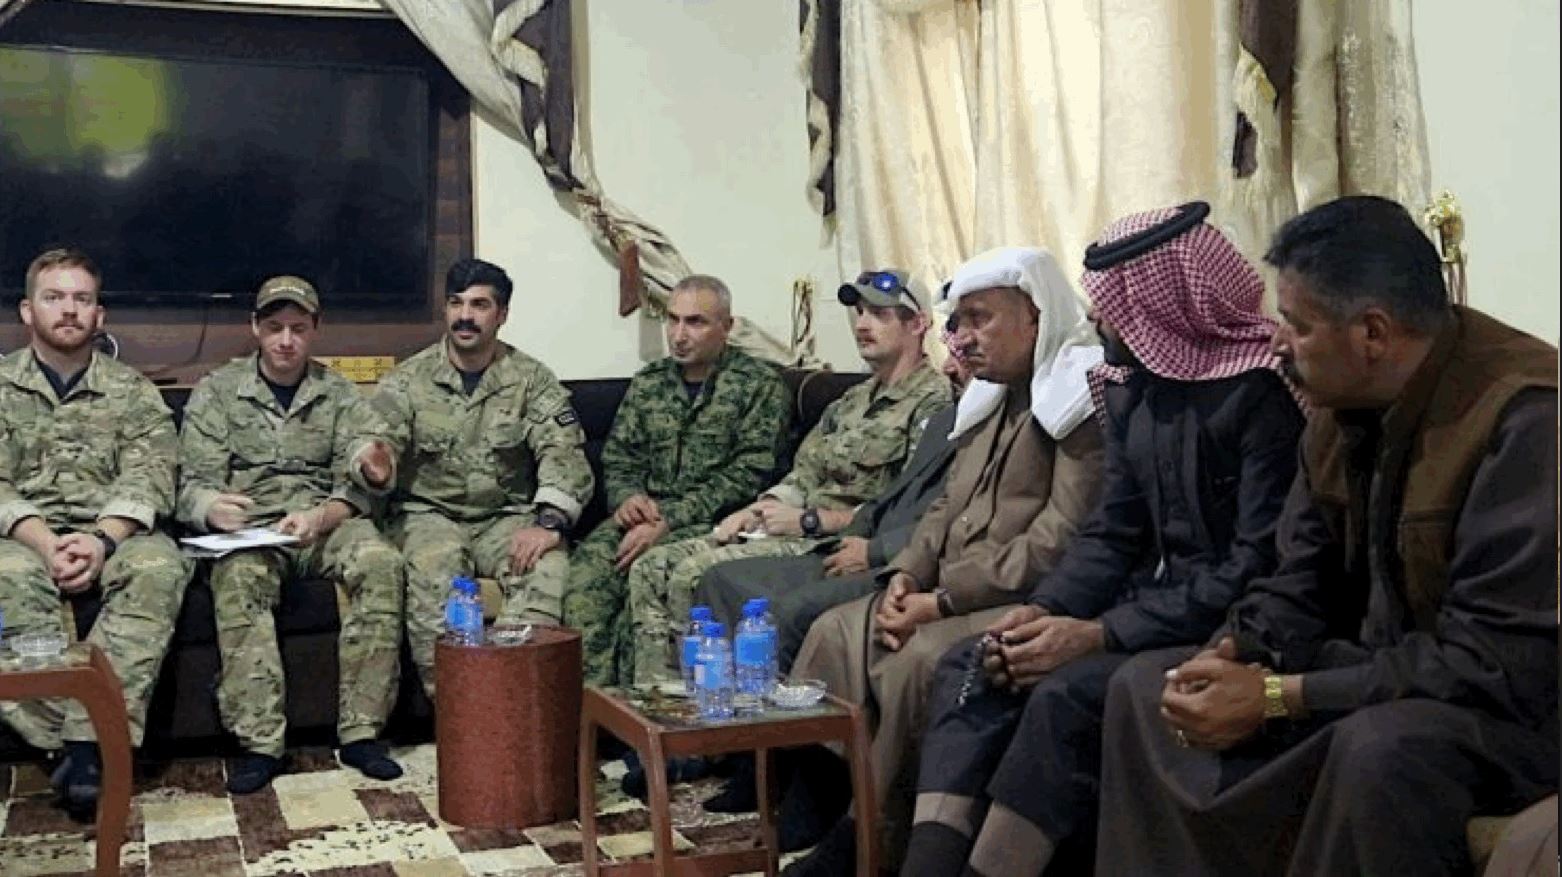 US and SDF fighters on Tuesday met with local tribal leaders in Deir ez-Zor (Photo: SDF Press).